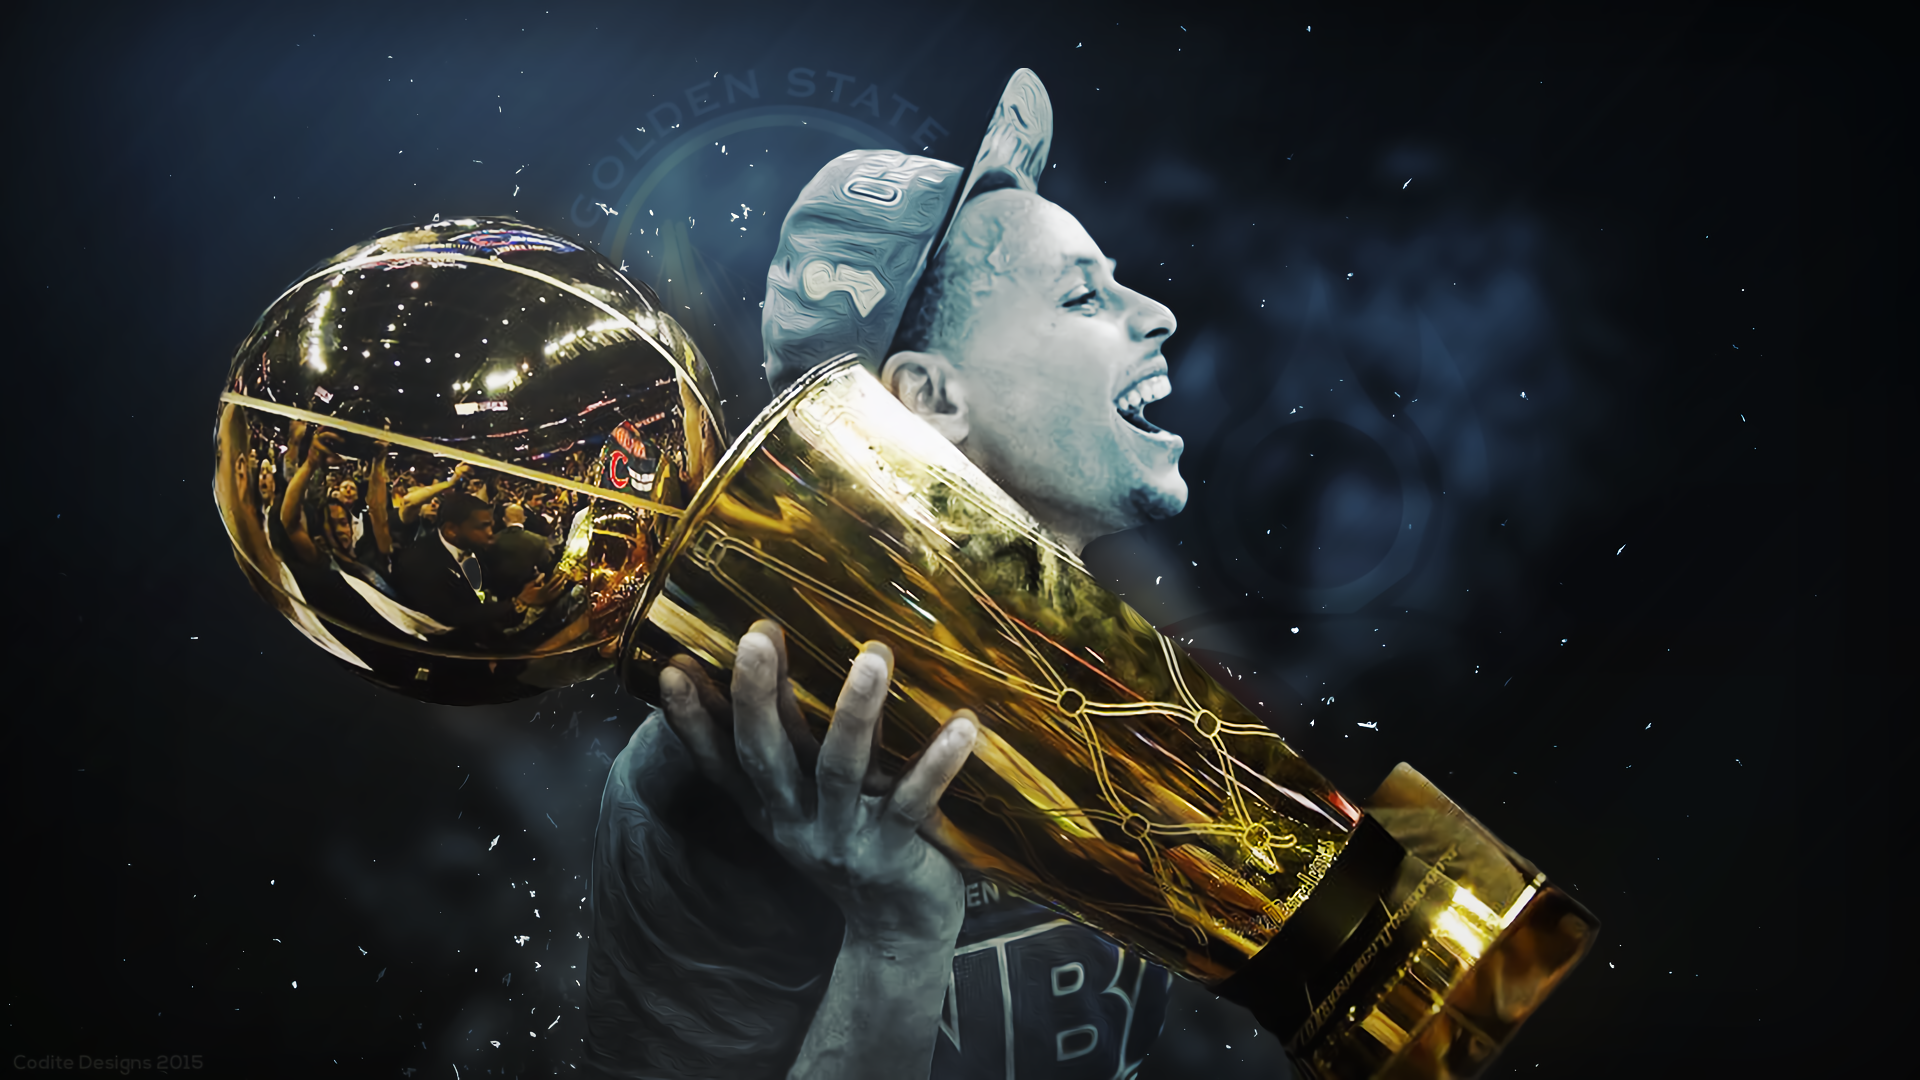 Sports Stephen Curry 1920x1080